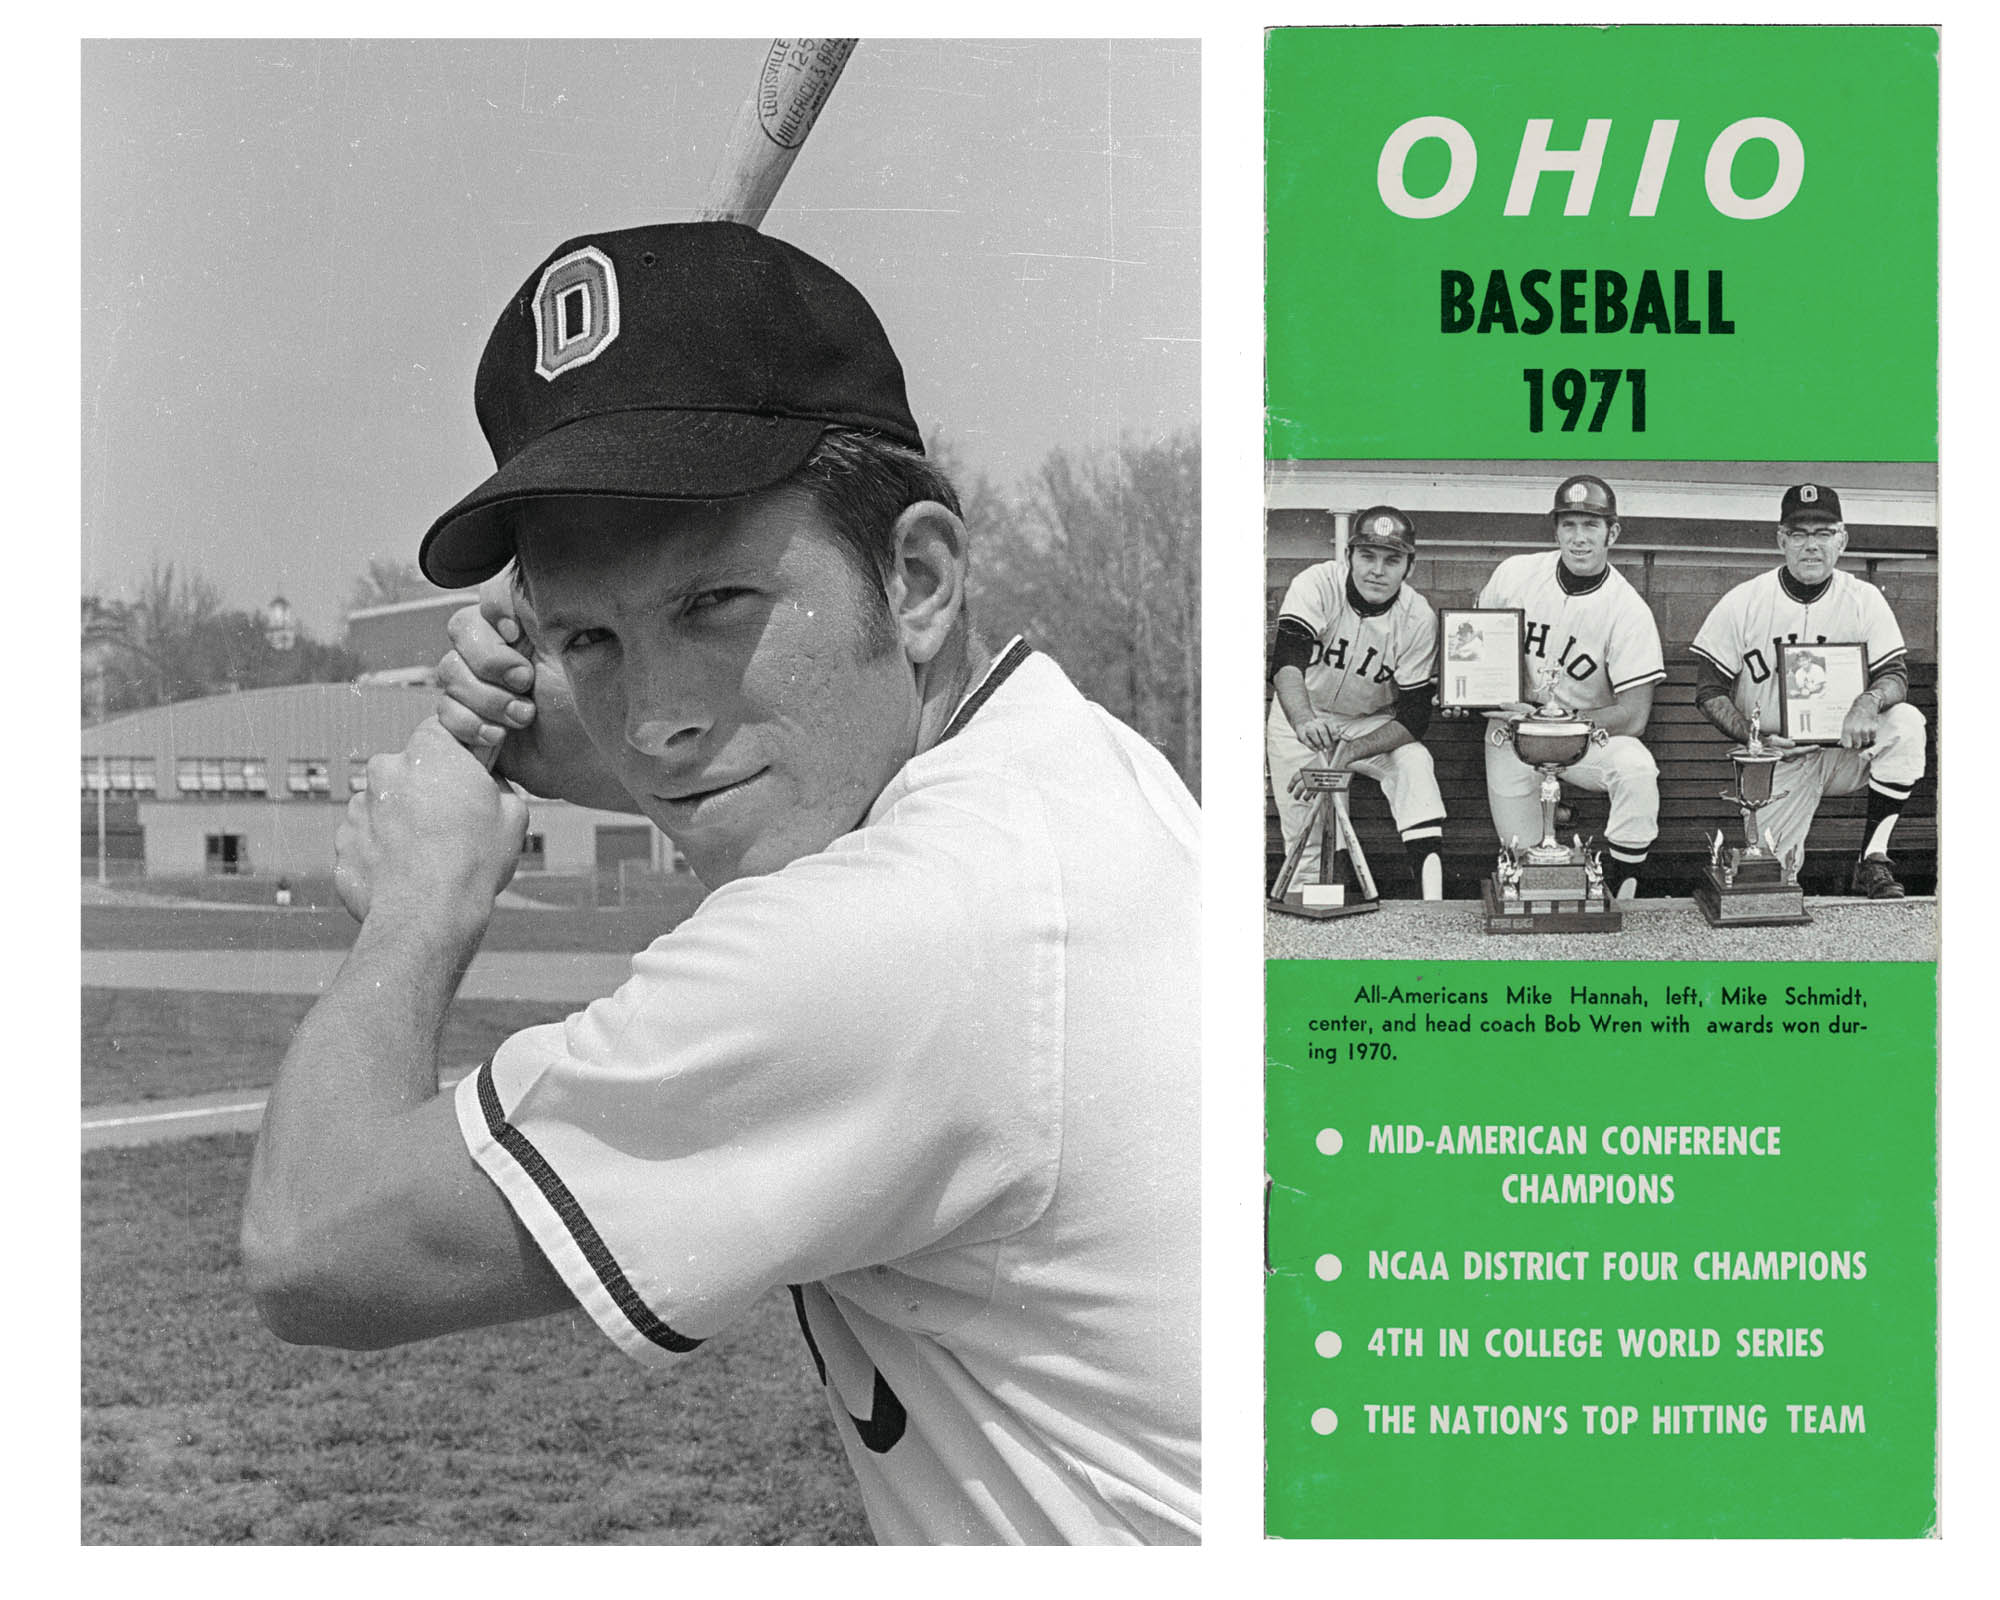 OHIO Baseball 1971 - All Americans Mike Hannah, Mike Schmidt, and head coach Bob Wren with awards won during 1970. Mid-American Conference Champions, NCAA District Four Champions, 4th in College World Series, The Nation's Top Hitting Team